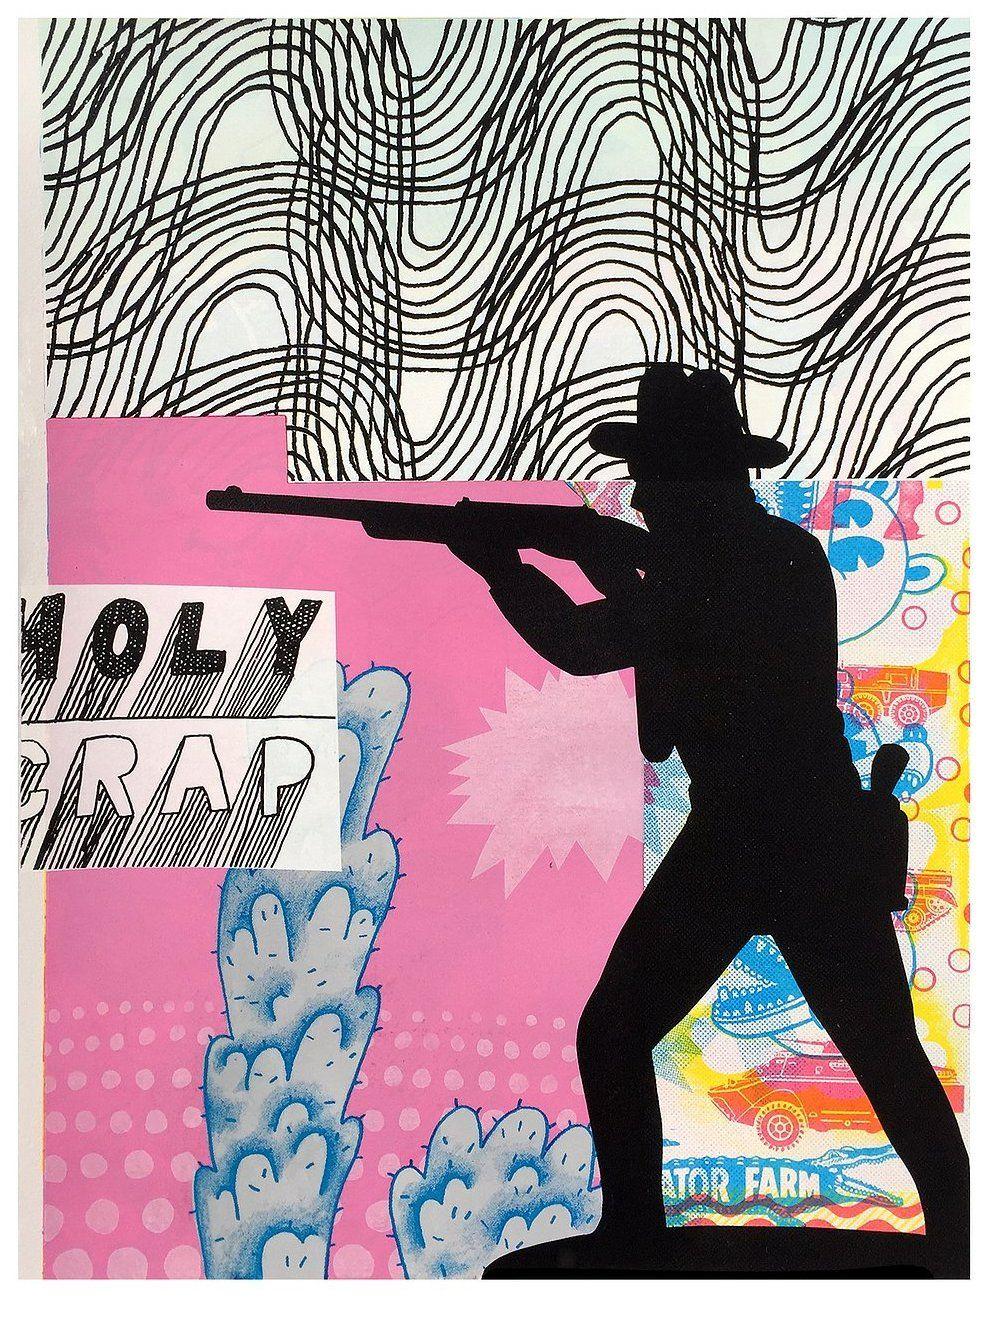 Chadwick Tolley Abstract Print - Holy Crap (4/10)